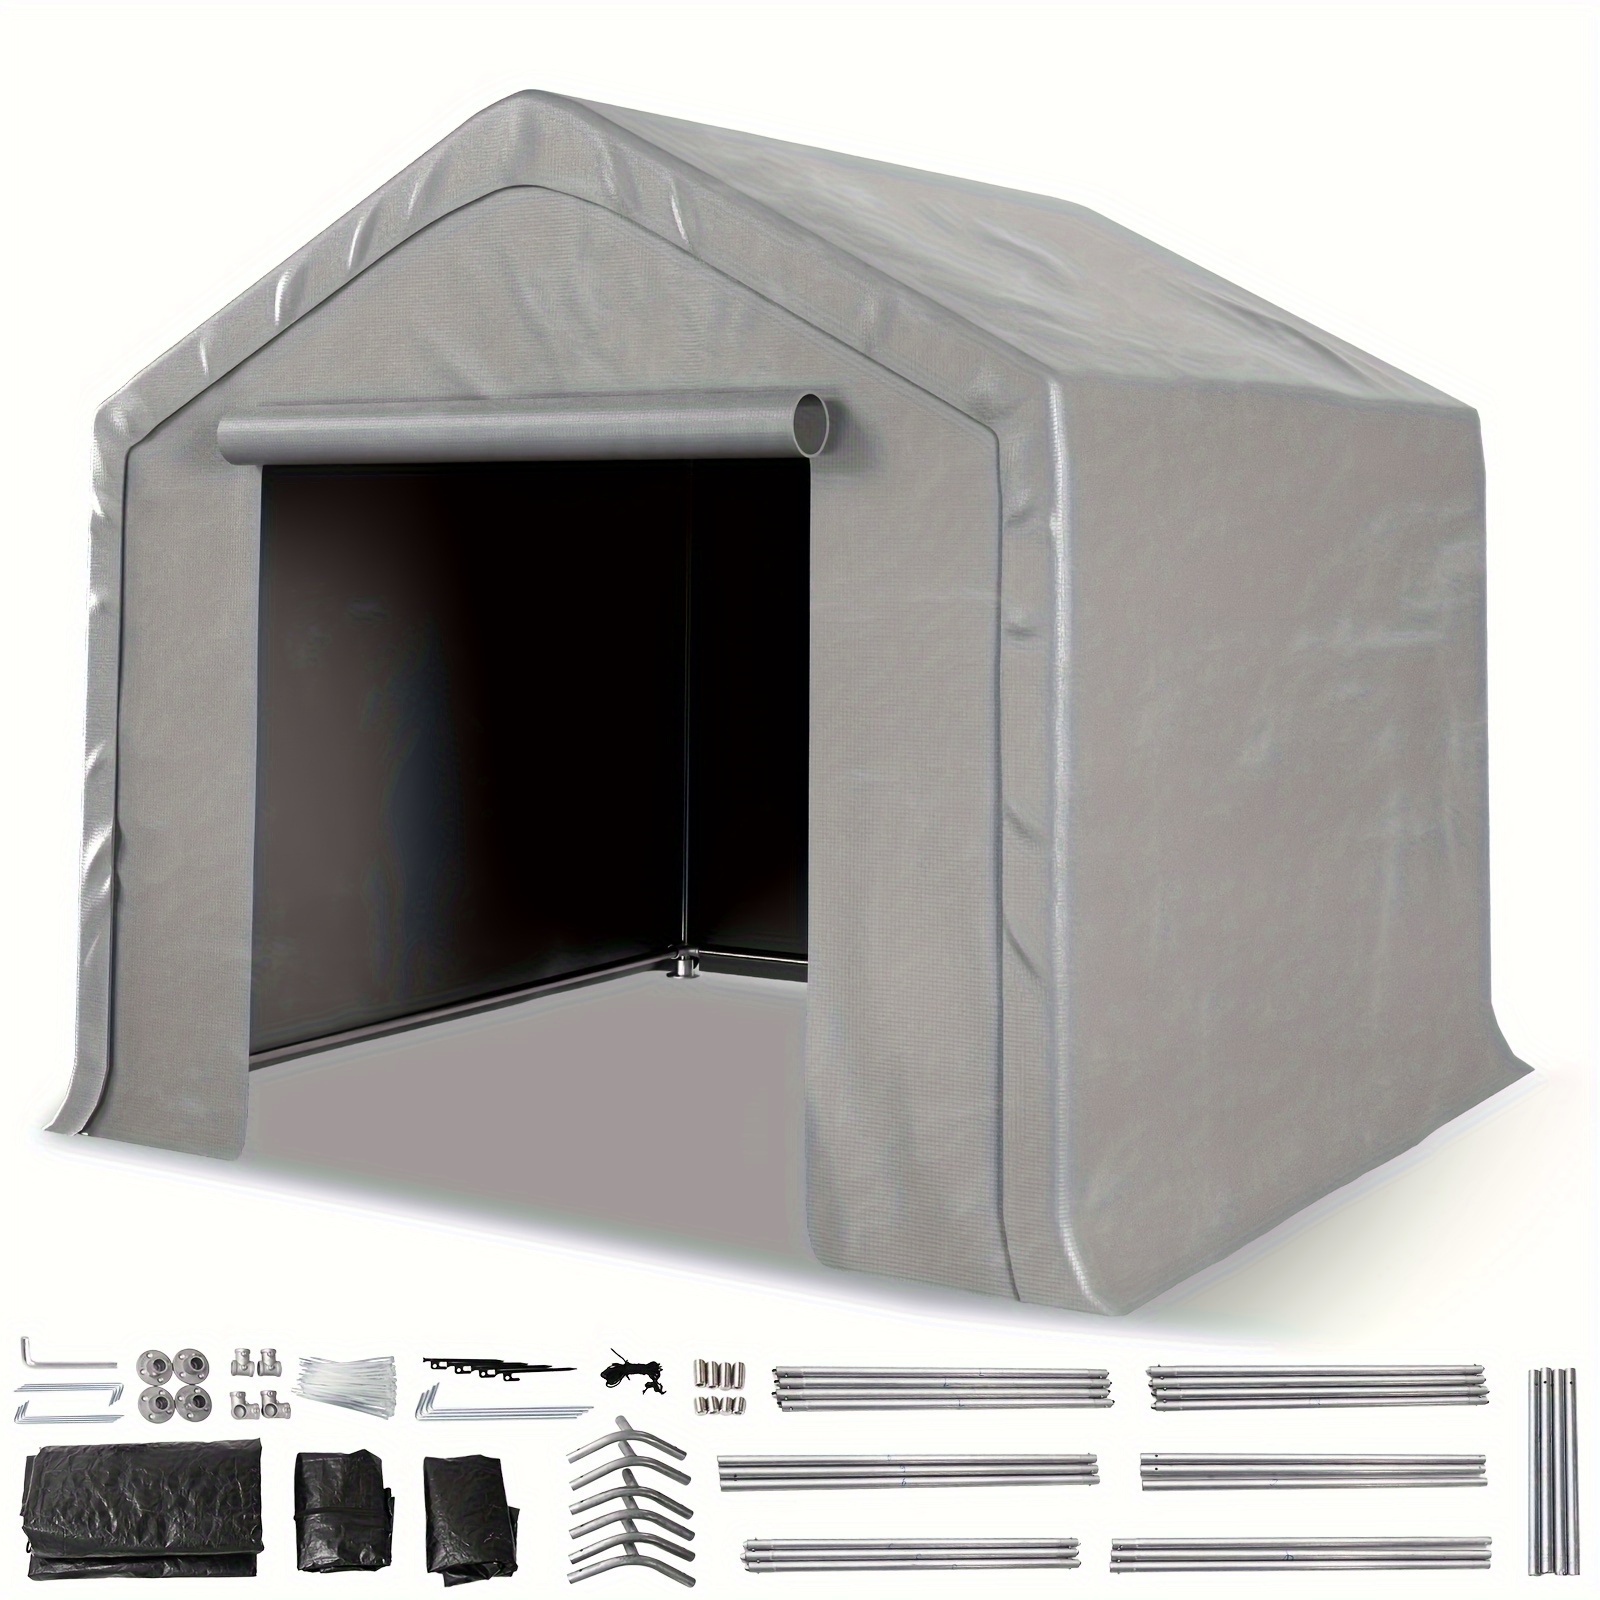 

Mophoto 6 X 6 X 6 Ft Portable Shed Outdoor Storage Shelter, Heavy Duty All-season Instant Waterproof Storage Tent Sheds With Roll-up Zipper Door For Motorcycle, Bike, Garden Tools, Gray